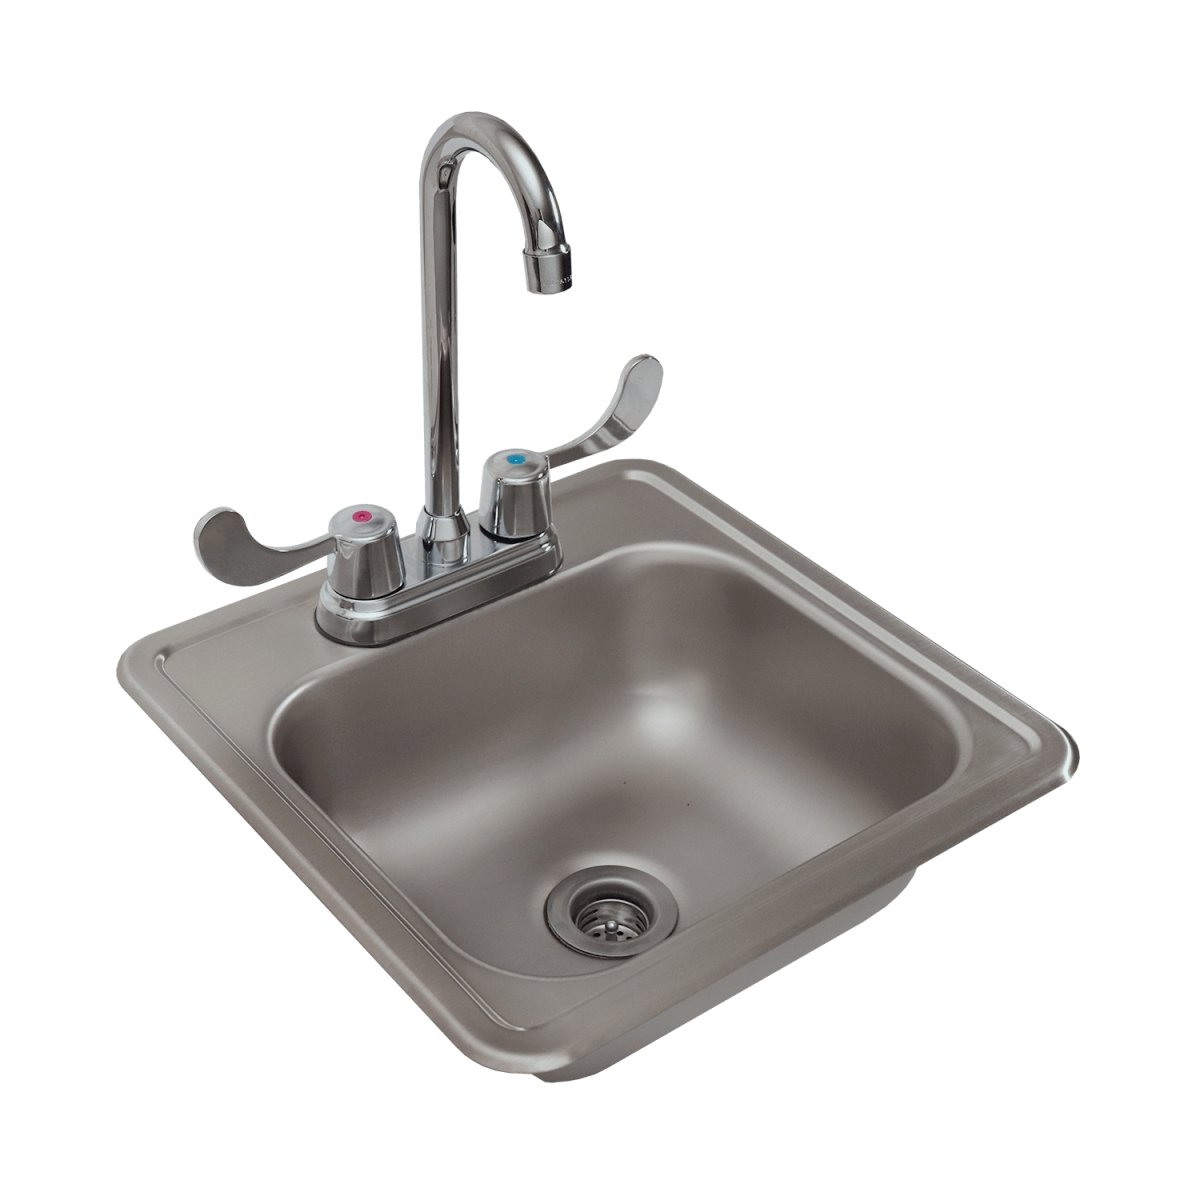 RCS Stainless Sink & Faucet 15"x15" (Was 107500) RSNK1 - Texas Star Grill Shop RSNK1